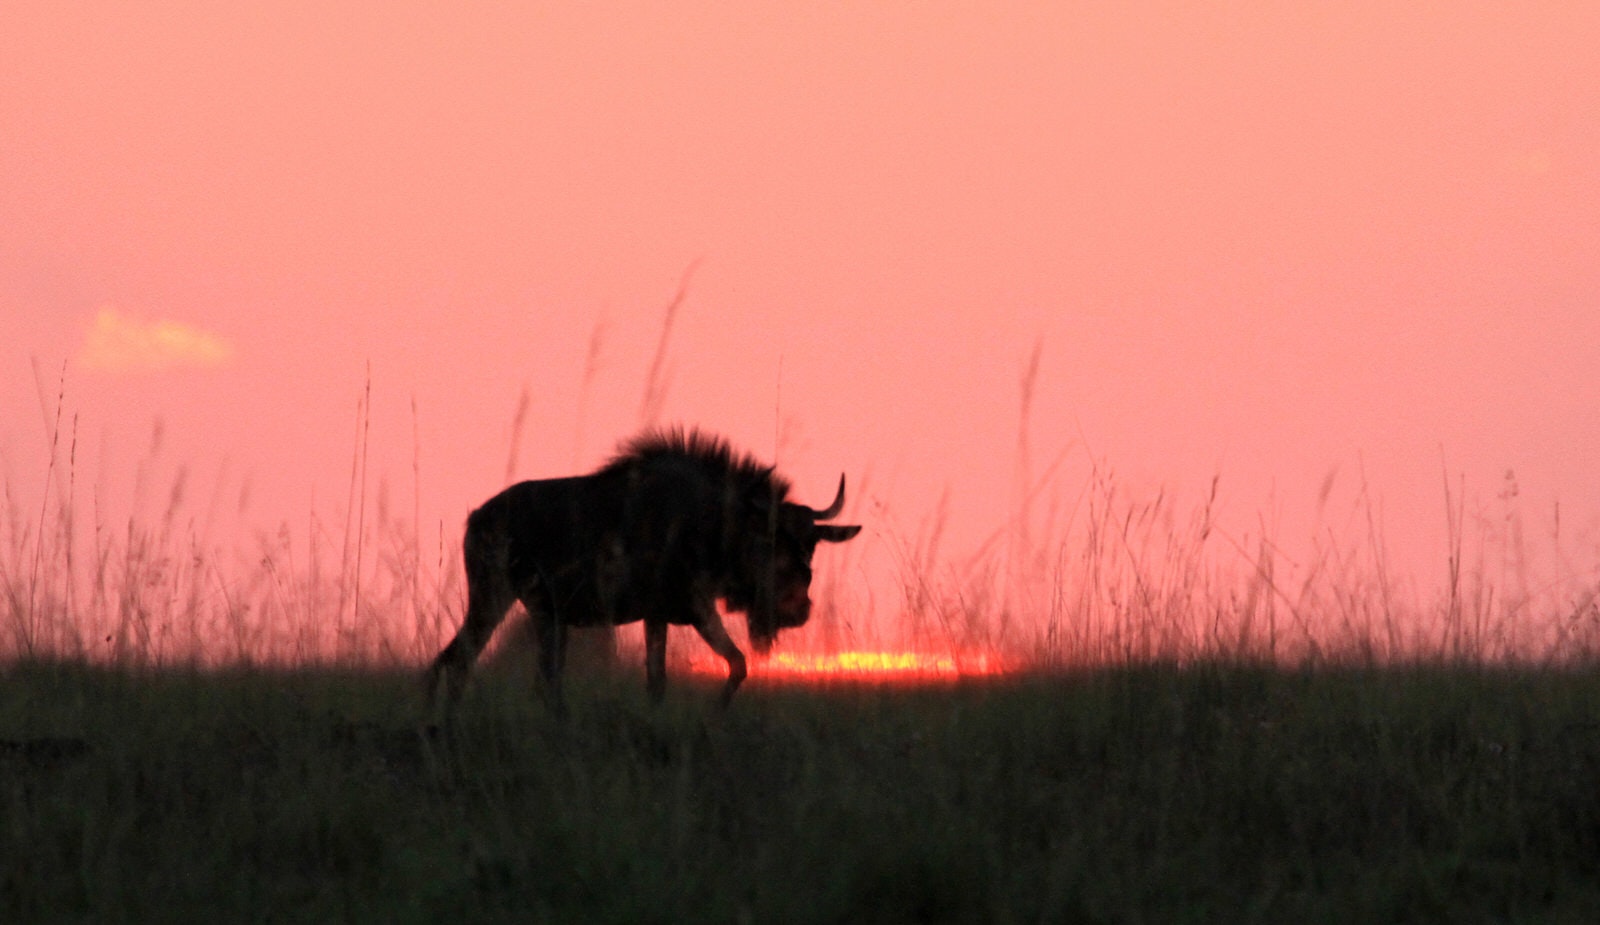 A wildebeest silhouetted against a pink sky grazes in the last light of the day © Will Whitford